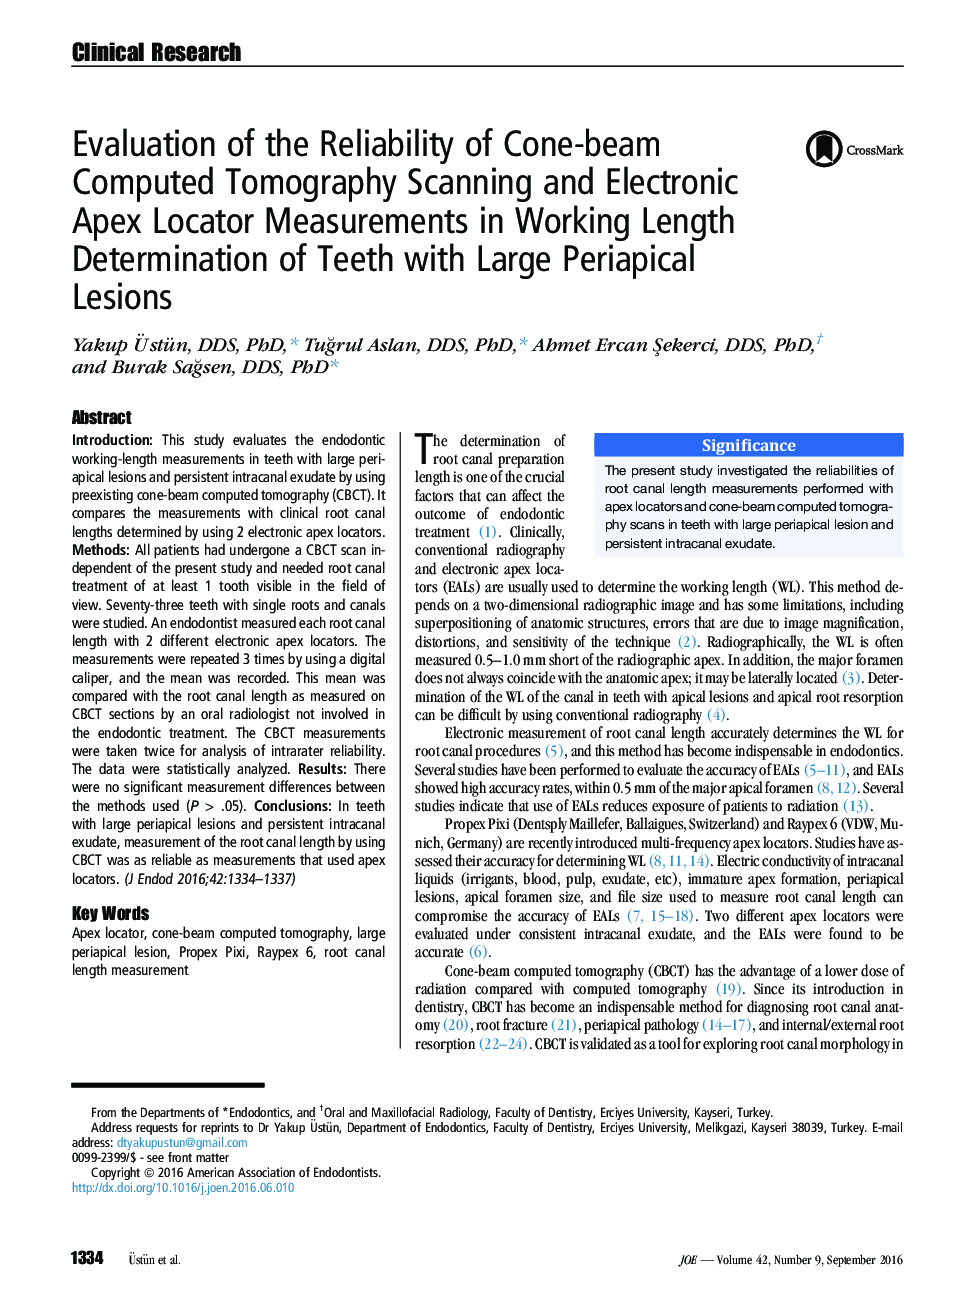 Evaluation of the Reliability of Cone-beam Computed Tomography Scanning and Electronic Apex Locator Measurements in Working Length Determination of Teeth with Large Periapical Lesions